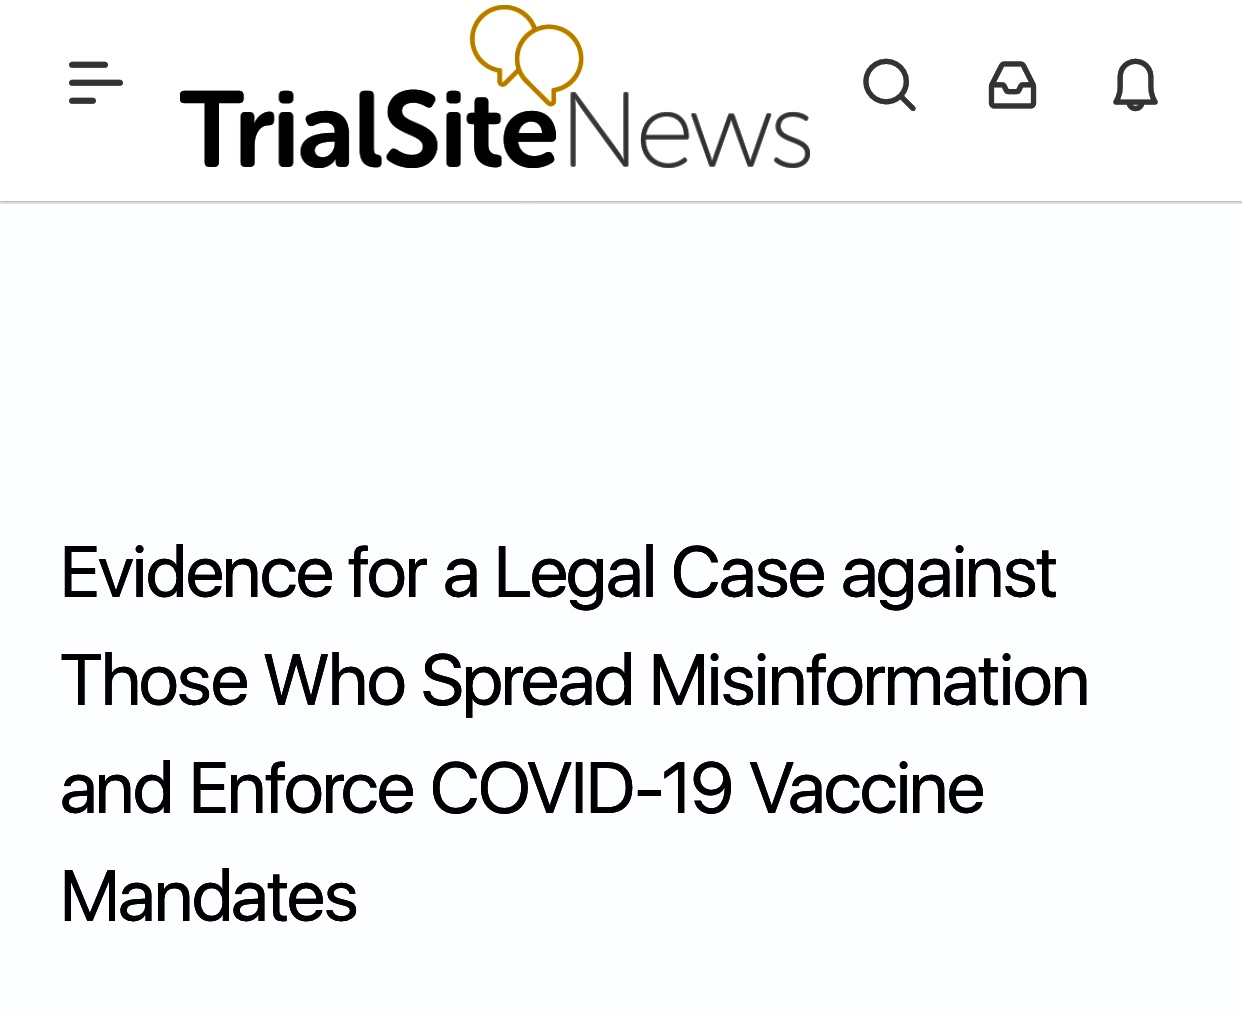 🚨🚨🚨Legal Case Against Those Who Spread Misinformation & Enforce COVID Vaccine Mandates